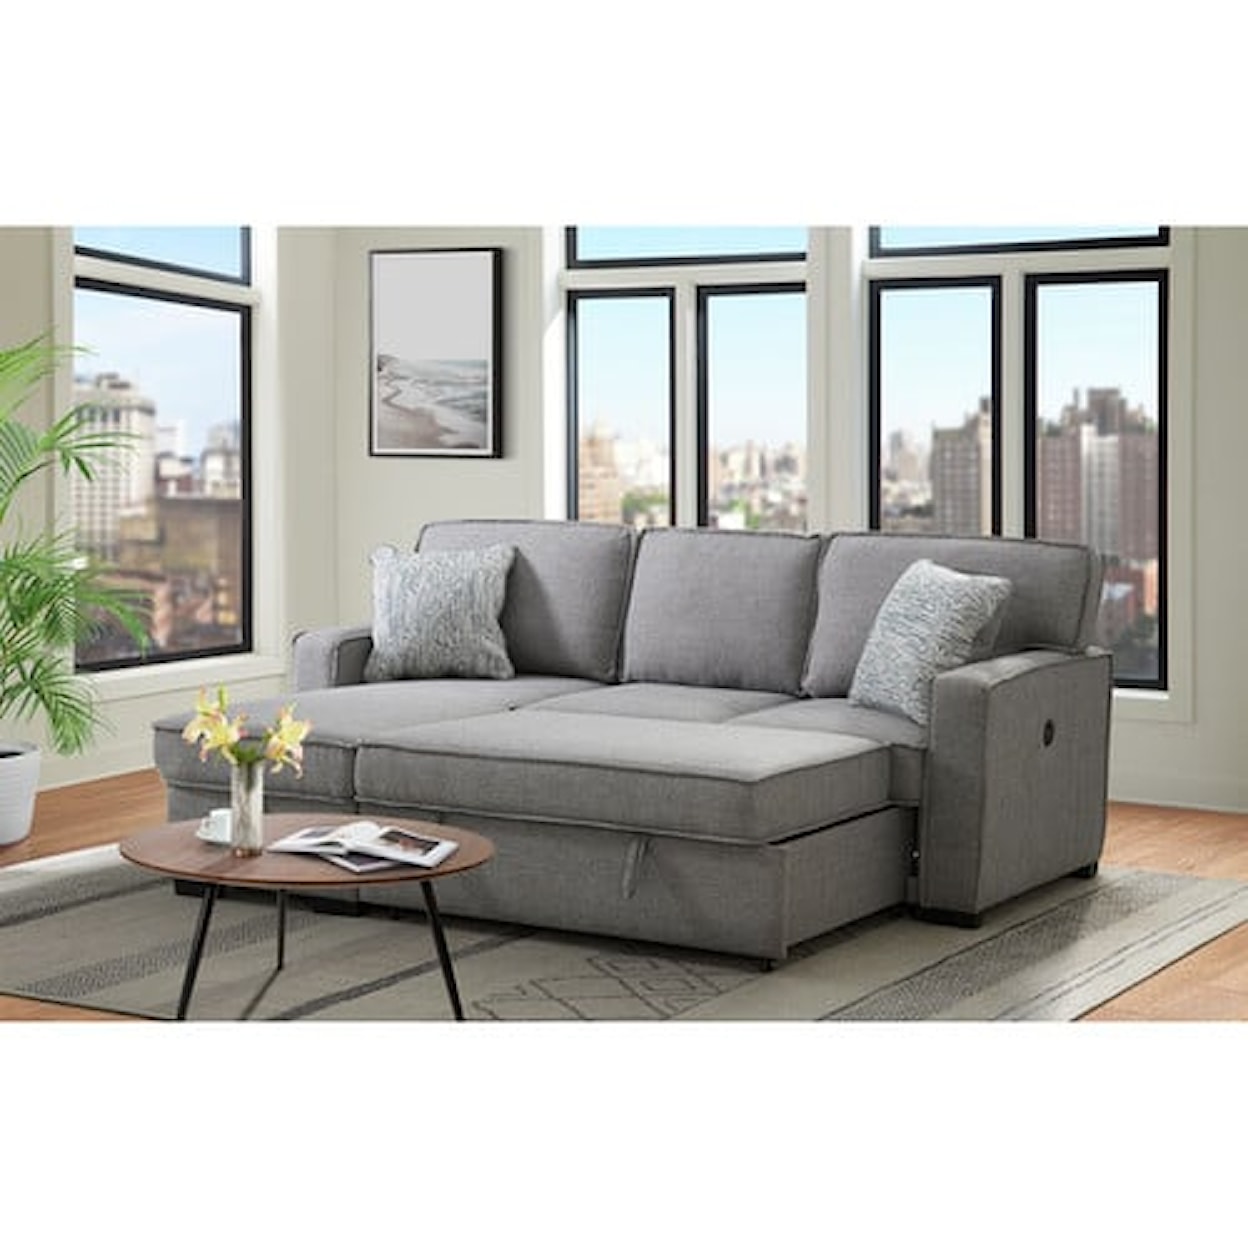 Elements International Venzy VENZY GREY SOFA CHAISE WITH PULL | OUT BED